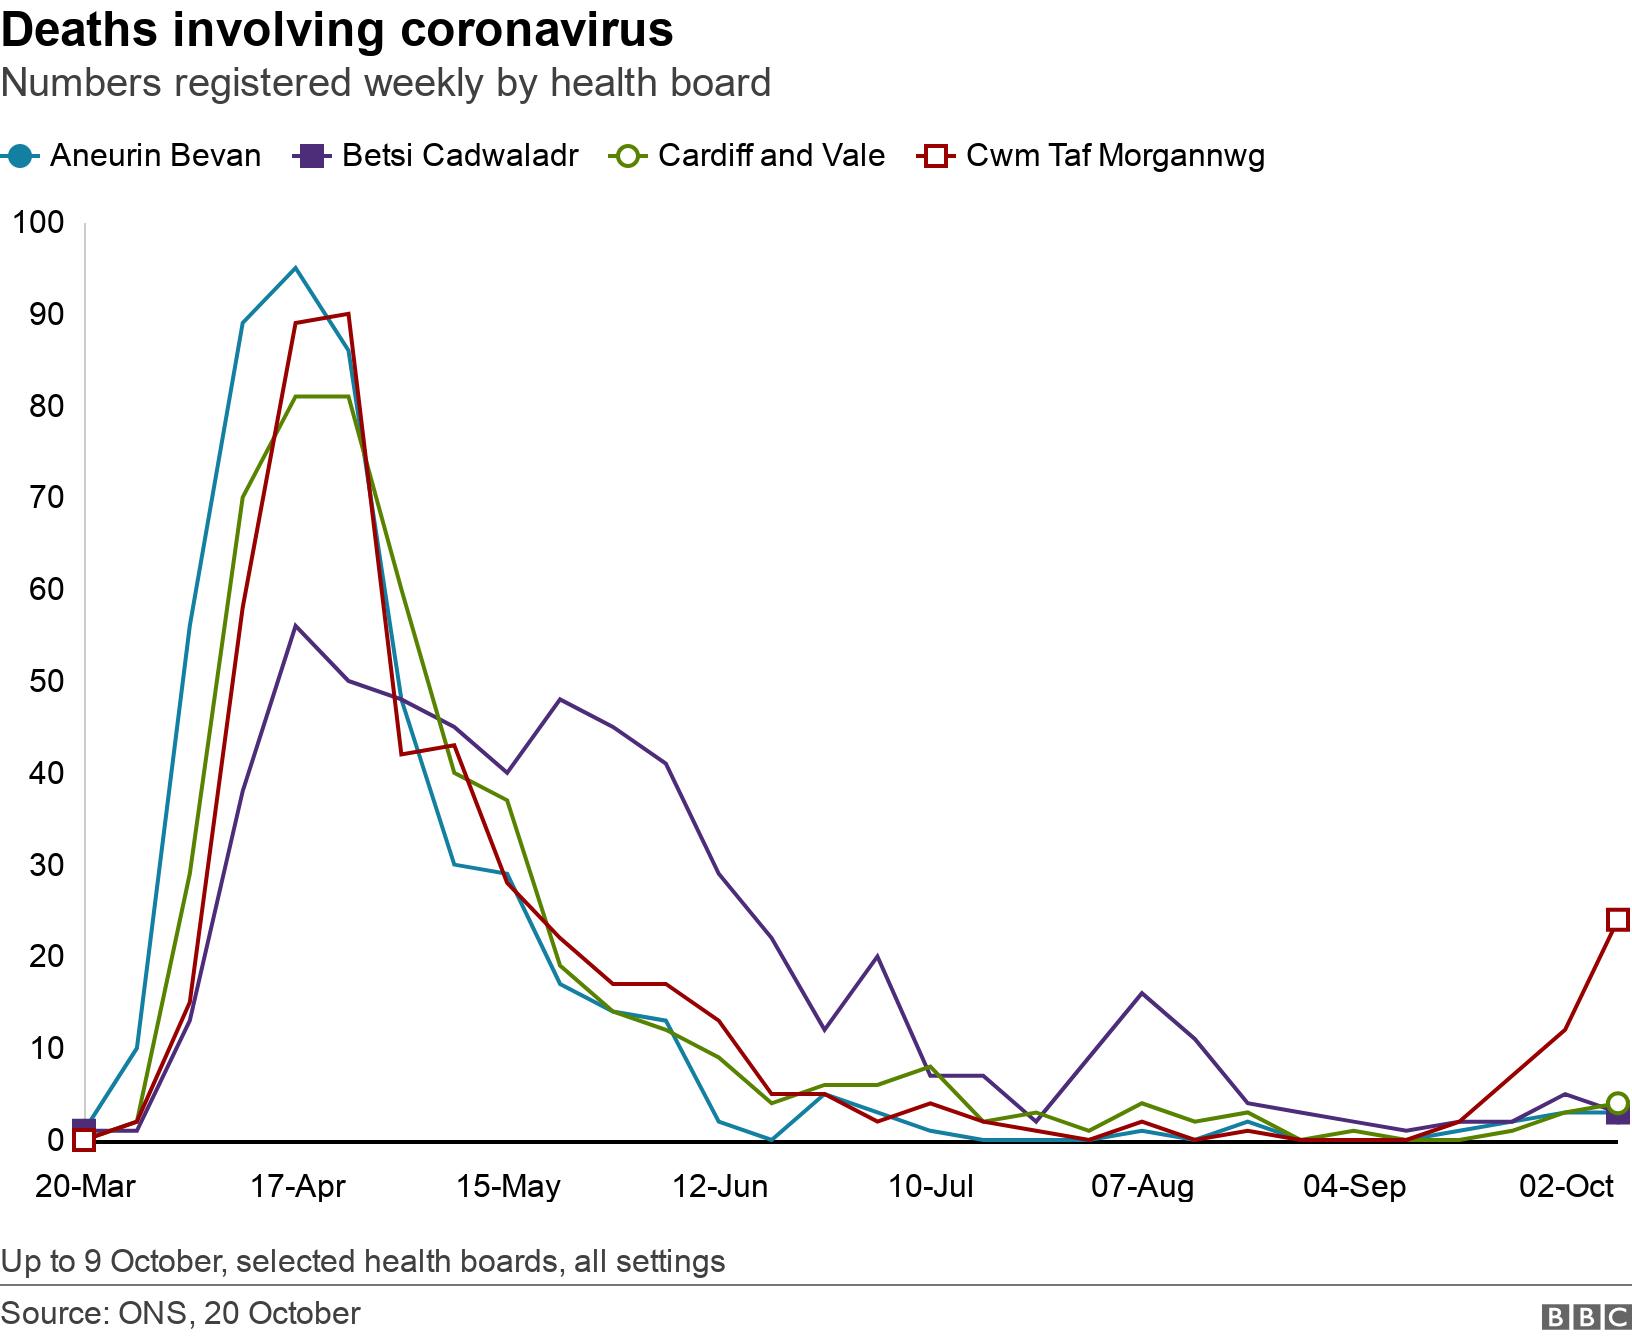 Deaths involving coronavirus. Numbers registered weekly by health board. Up to 9 October, selected health boards, all settings.